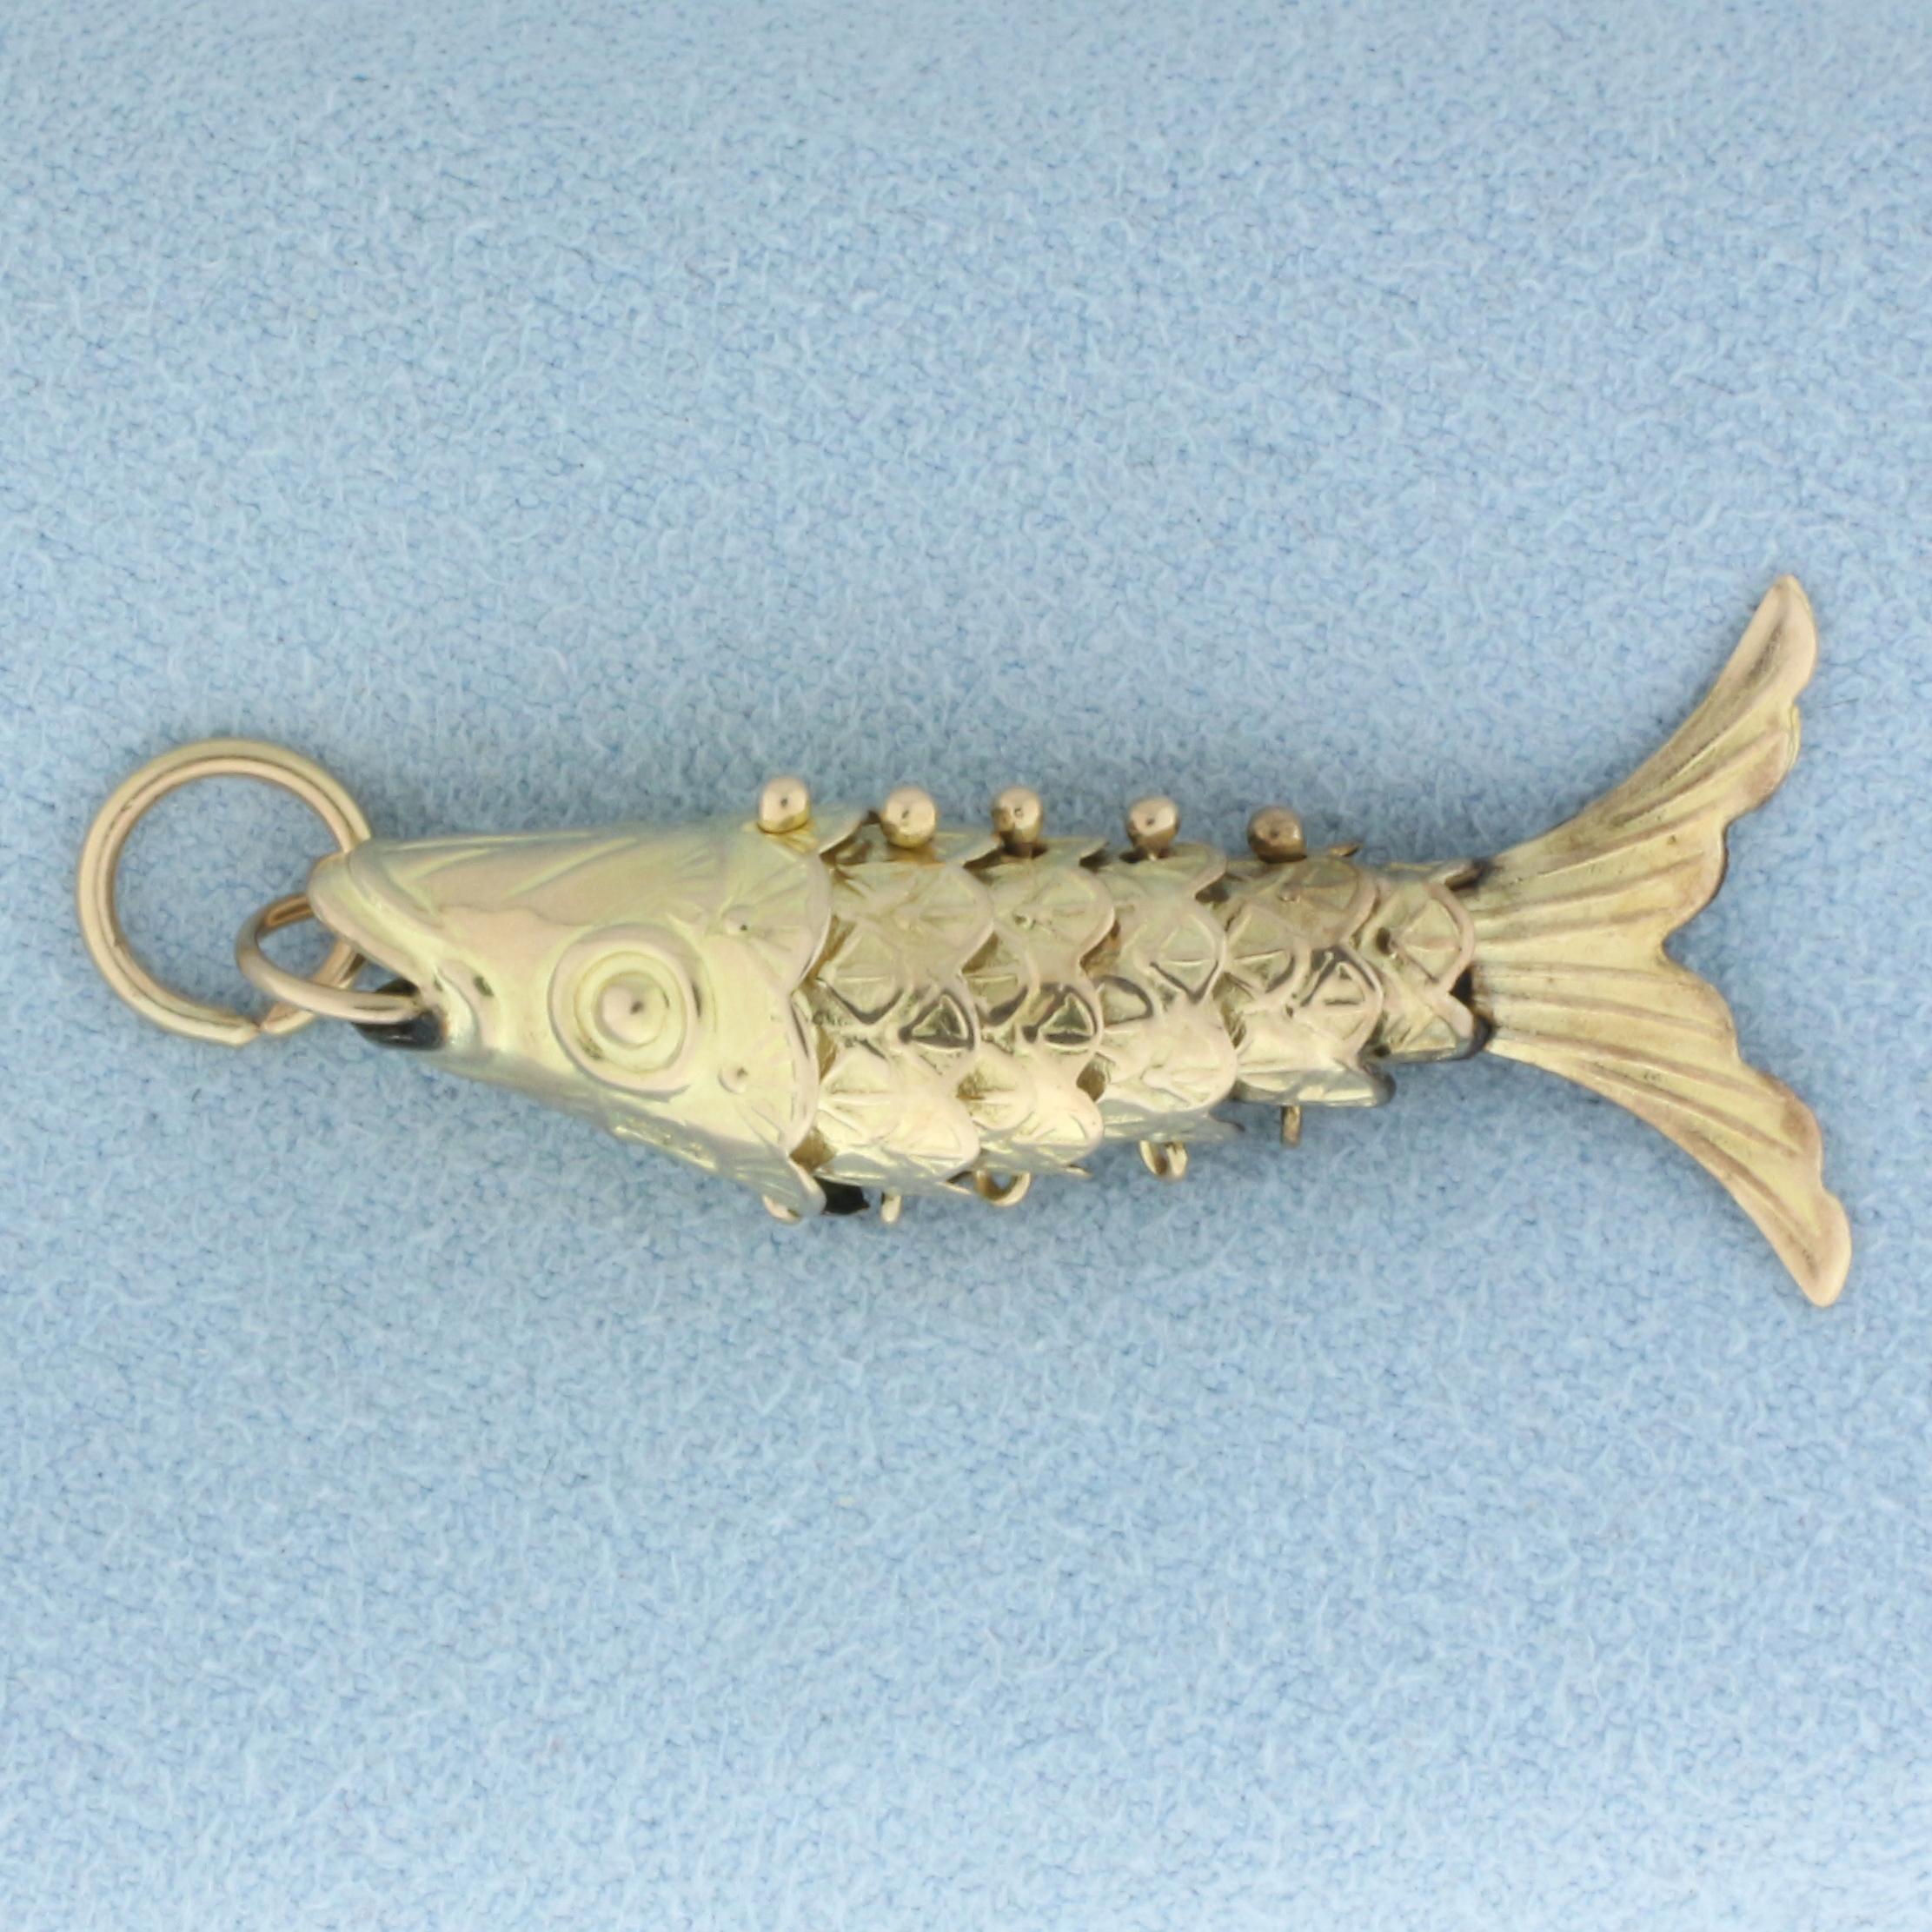 Vintage Articulating Mechanical Fish Charm Or Pendant In 14k Yellow Gold